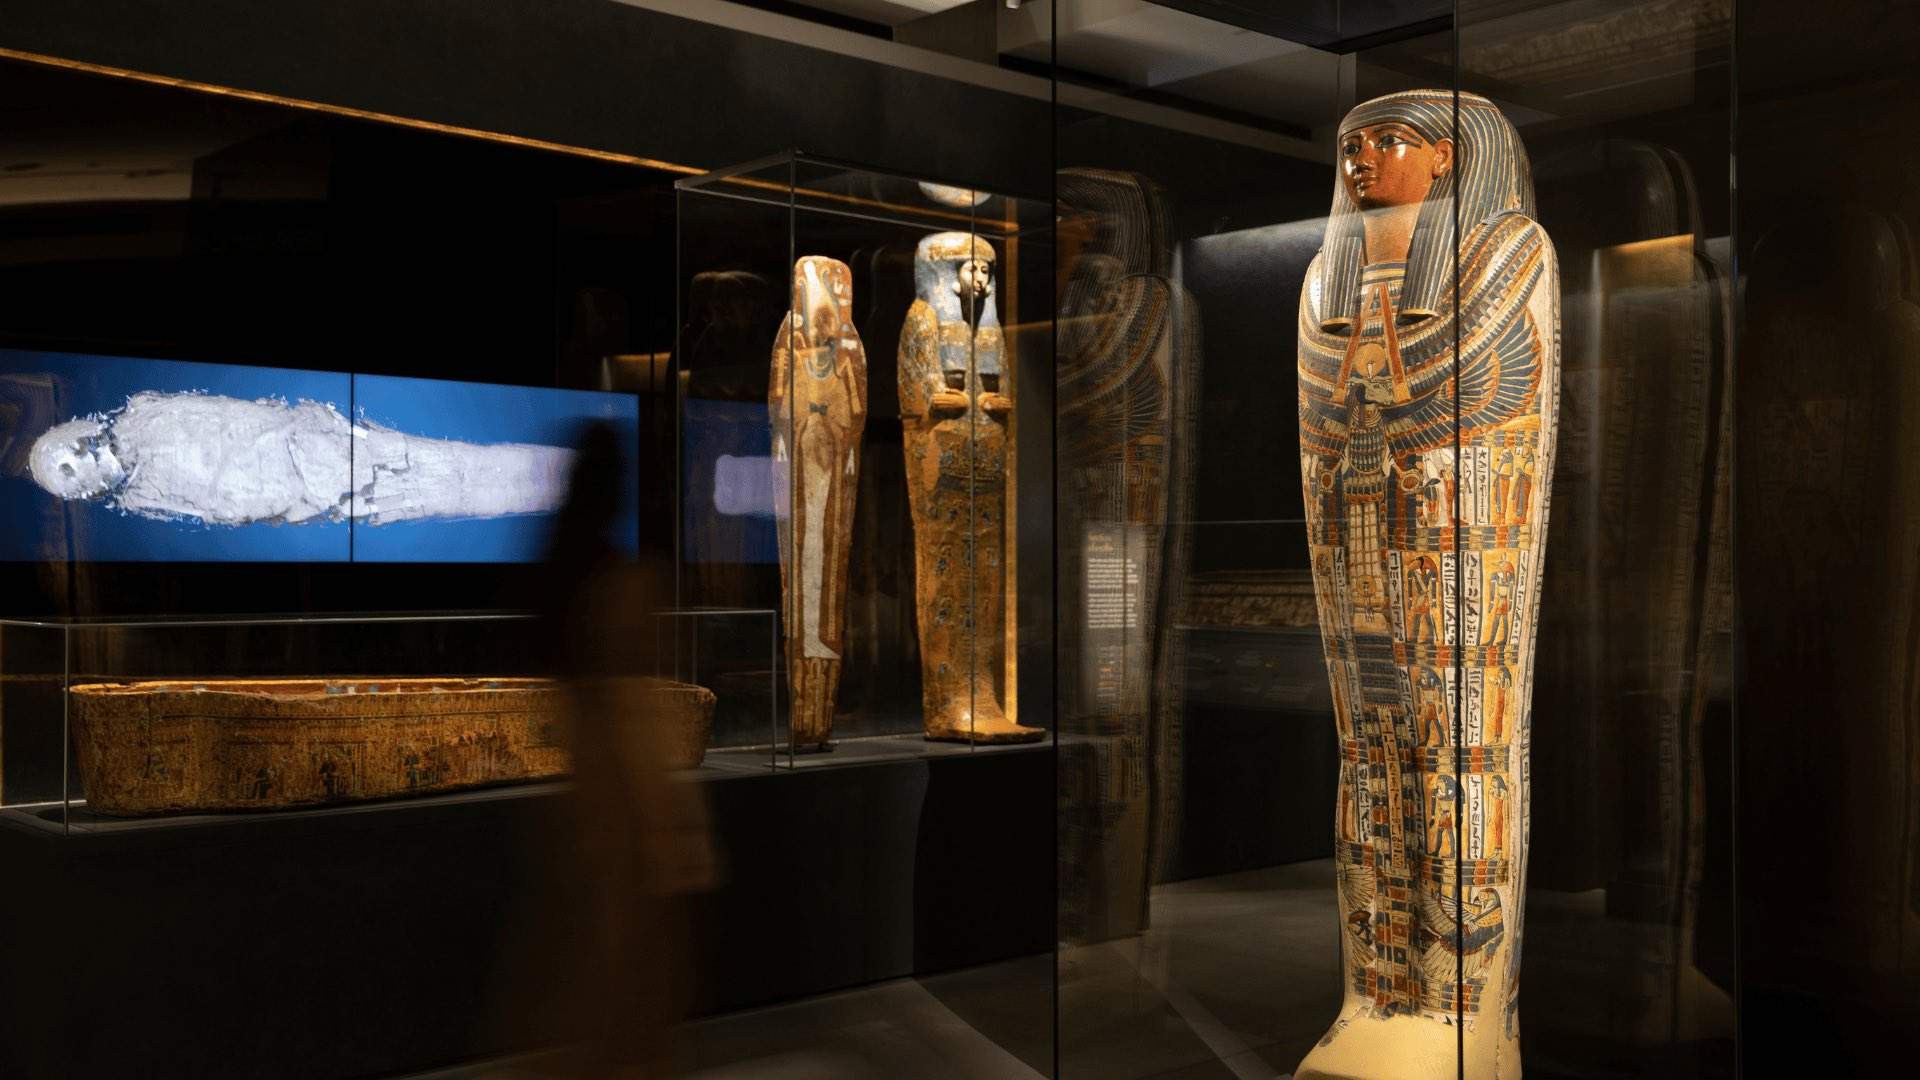 Photo of mummies at The Egyptian Galleries exhibit at the Chau Chak Wing Museum.